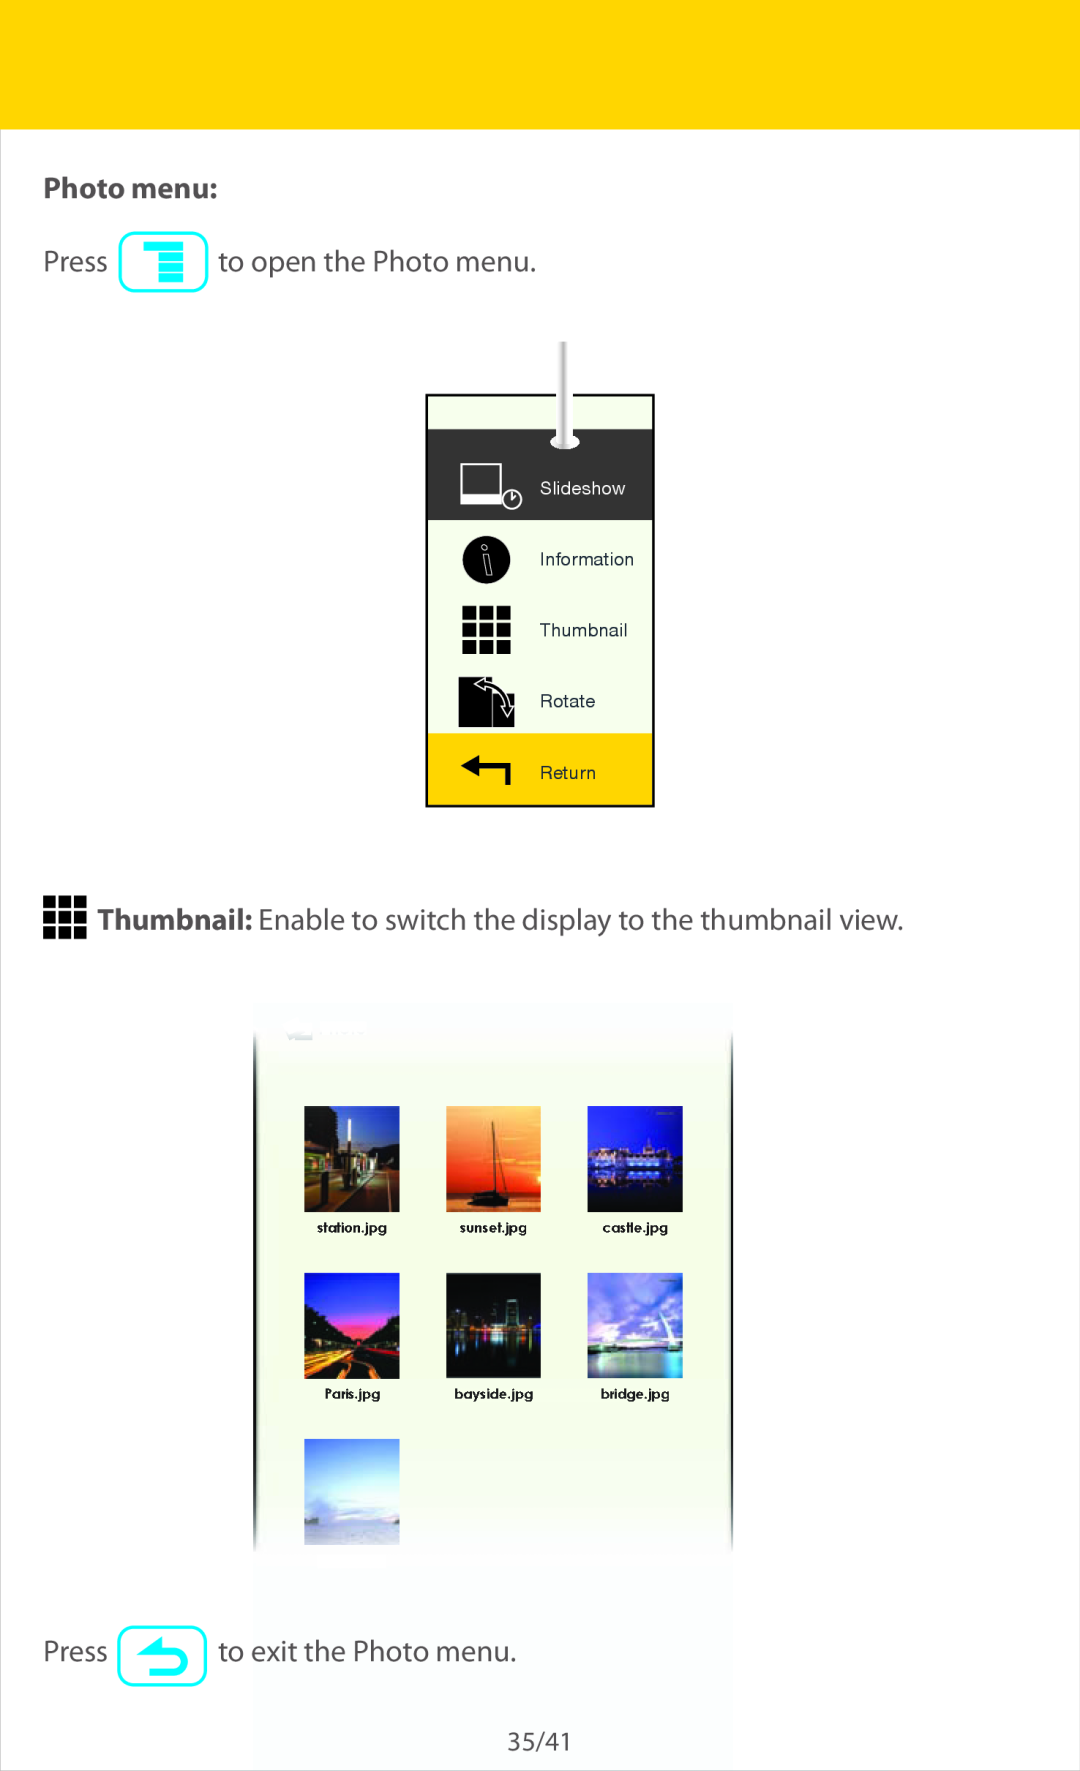 Slick ER701 Press to open the Photo menu, Thumbnail Enable to switch the display to the thumbnail view, Slideshow 